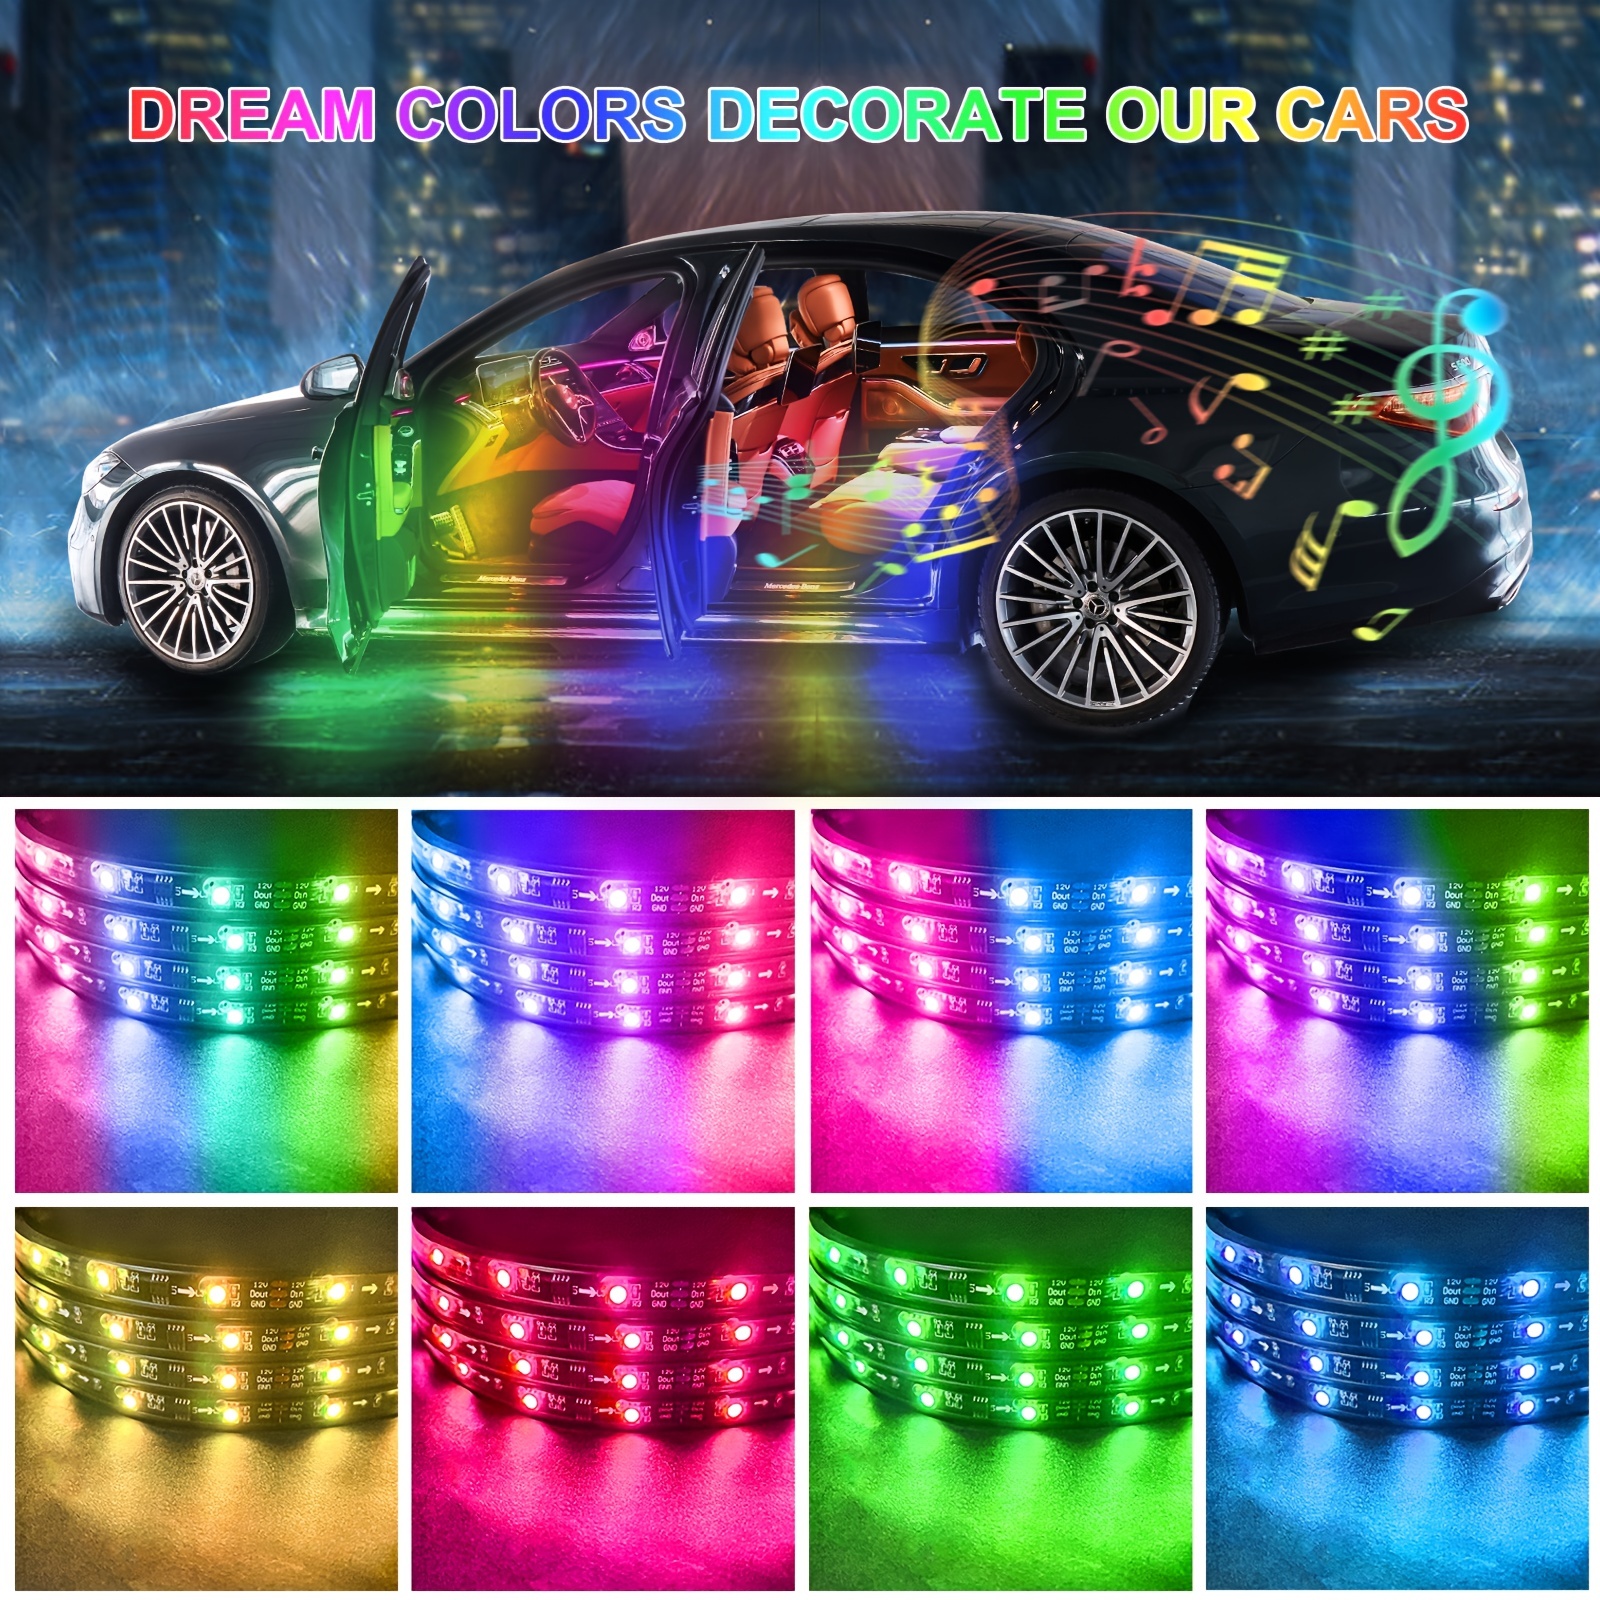 Car Interior Lights With Smart App Control, Rgbic Car Lights With Music  Sync Modemultiple Scene Options, Lines Design Car Led Lights For Cars,  Suvs Temu